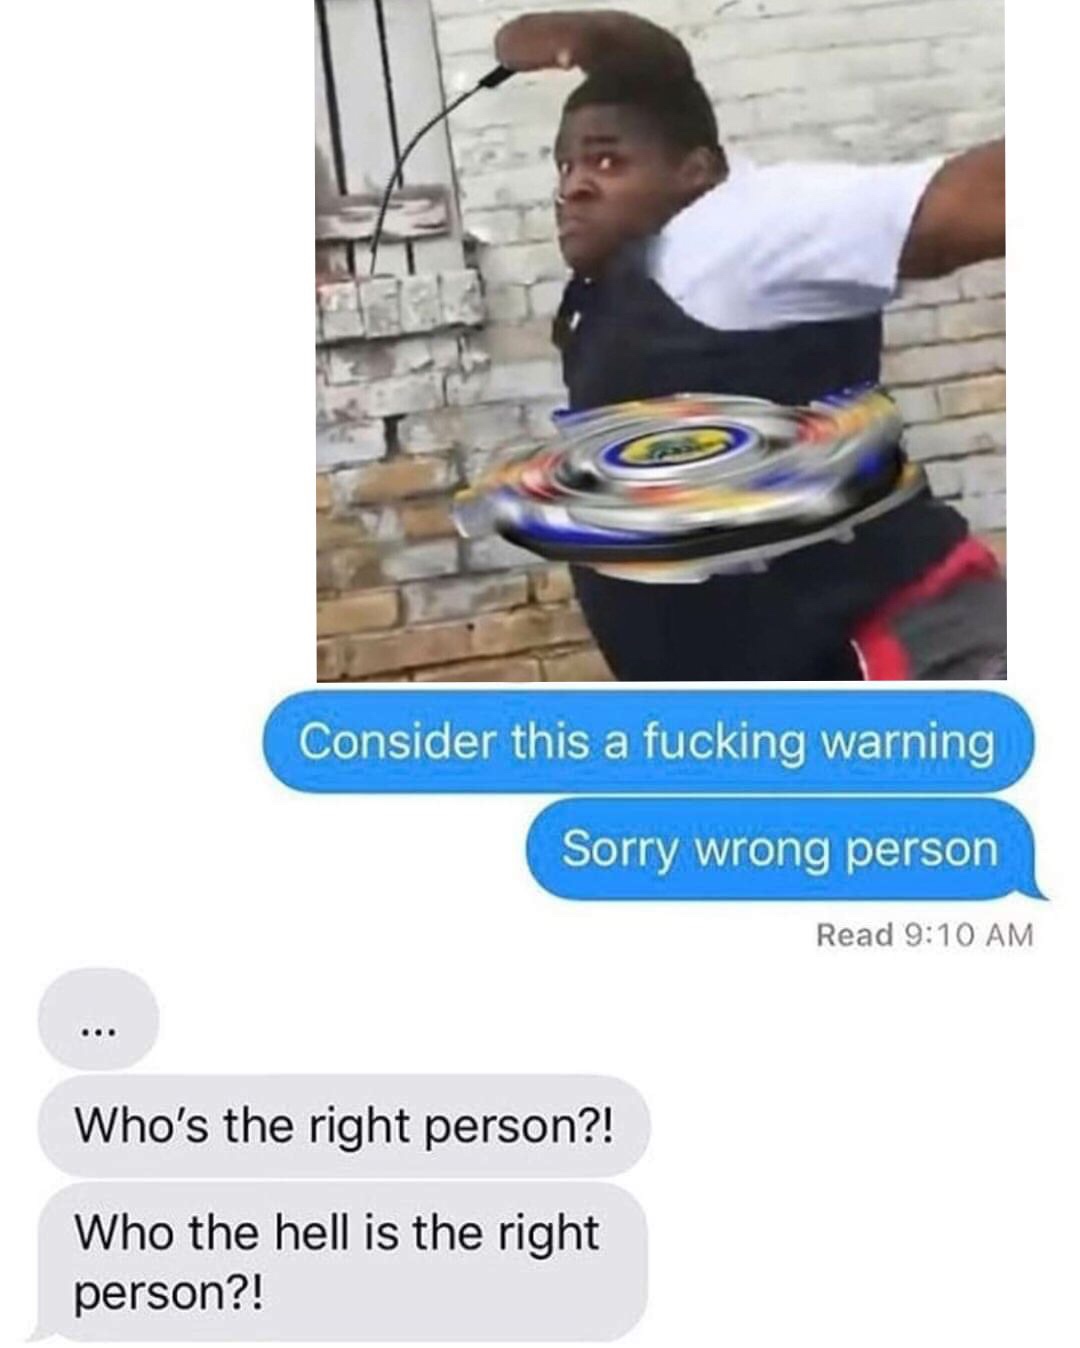 wrong number consider this a fucking warning meme - Consider this a fucking warning Sorry wrong person Read Who's the right person?! Who the hell is the right person?!